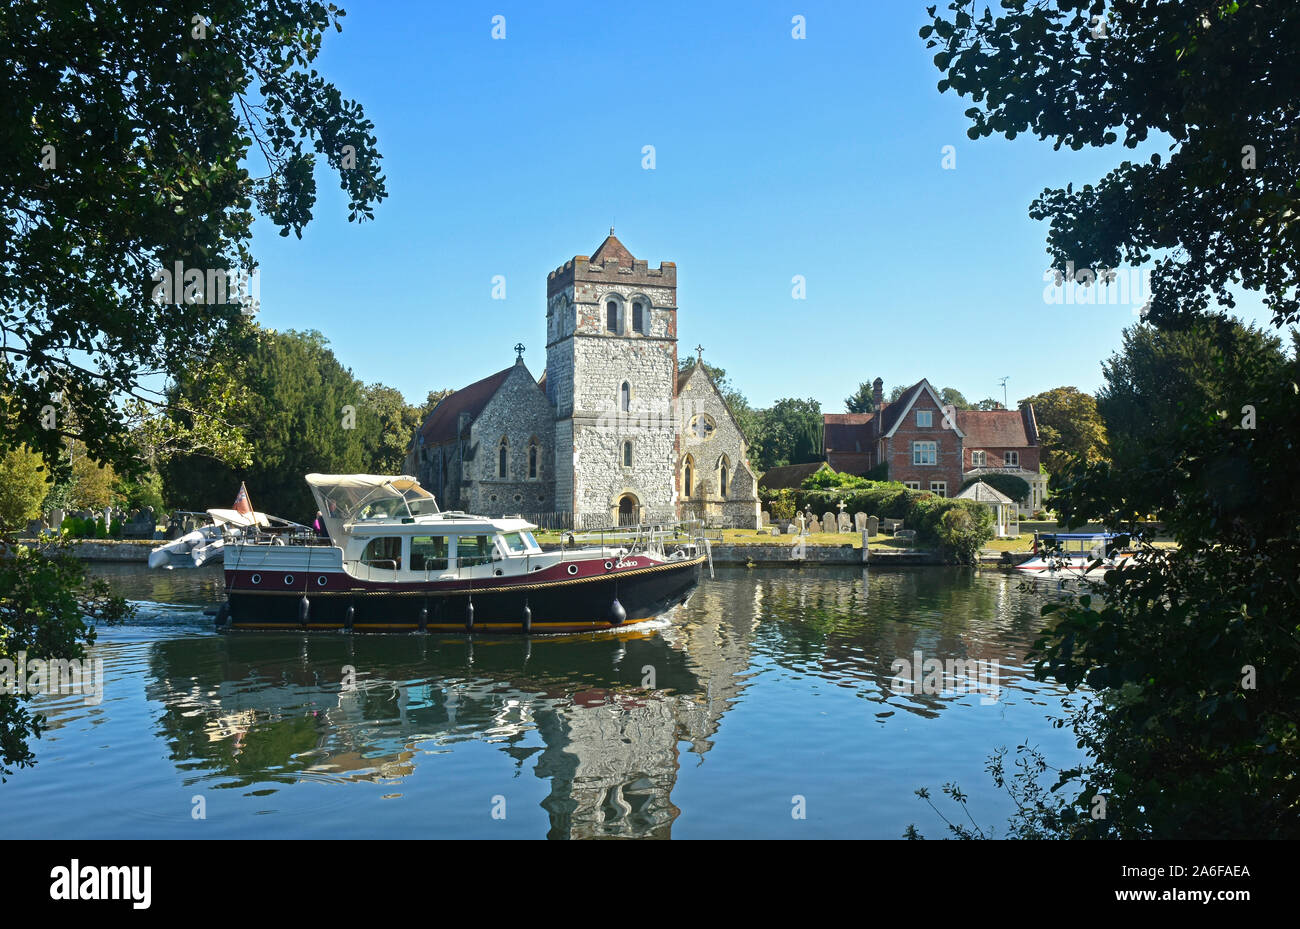 Berks - river Thames - summer day - river cruiser passing  Bisham church - reflections in the water -  sunlight - blue sky - picturesque Stock Photo